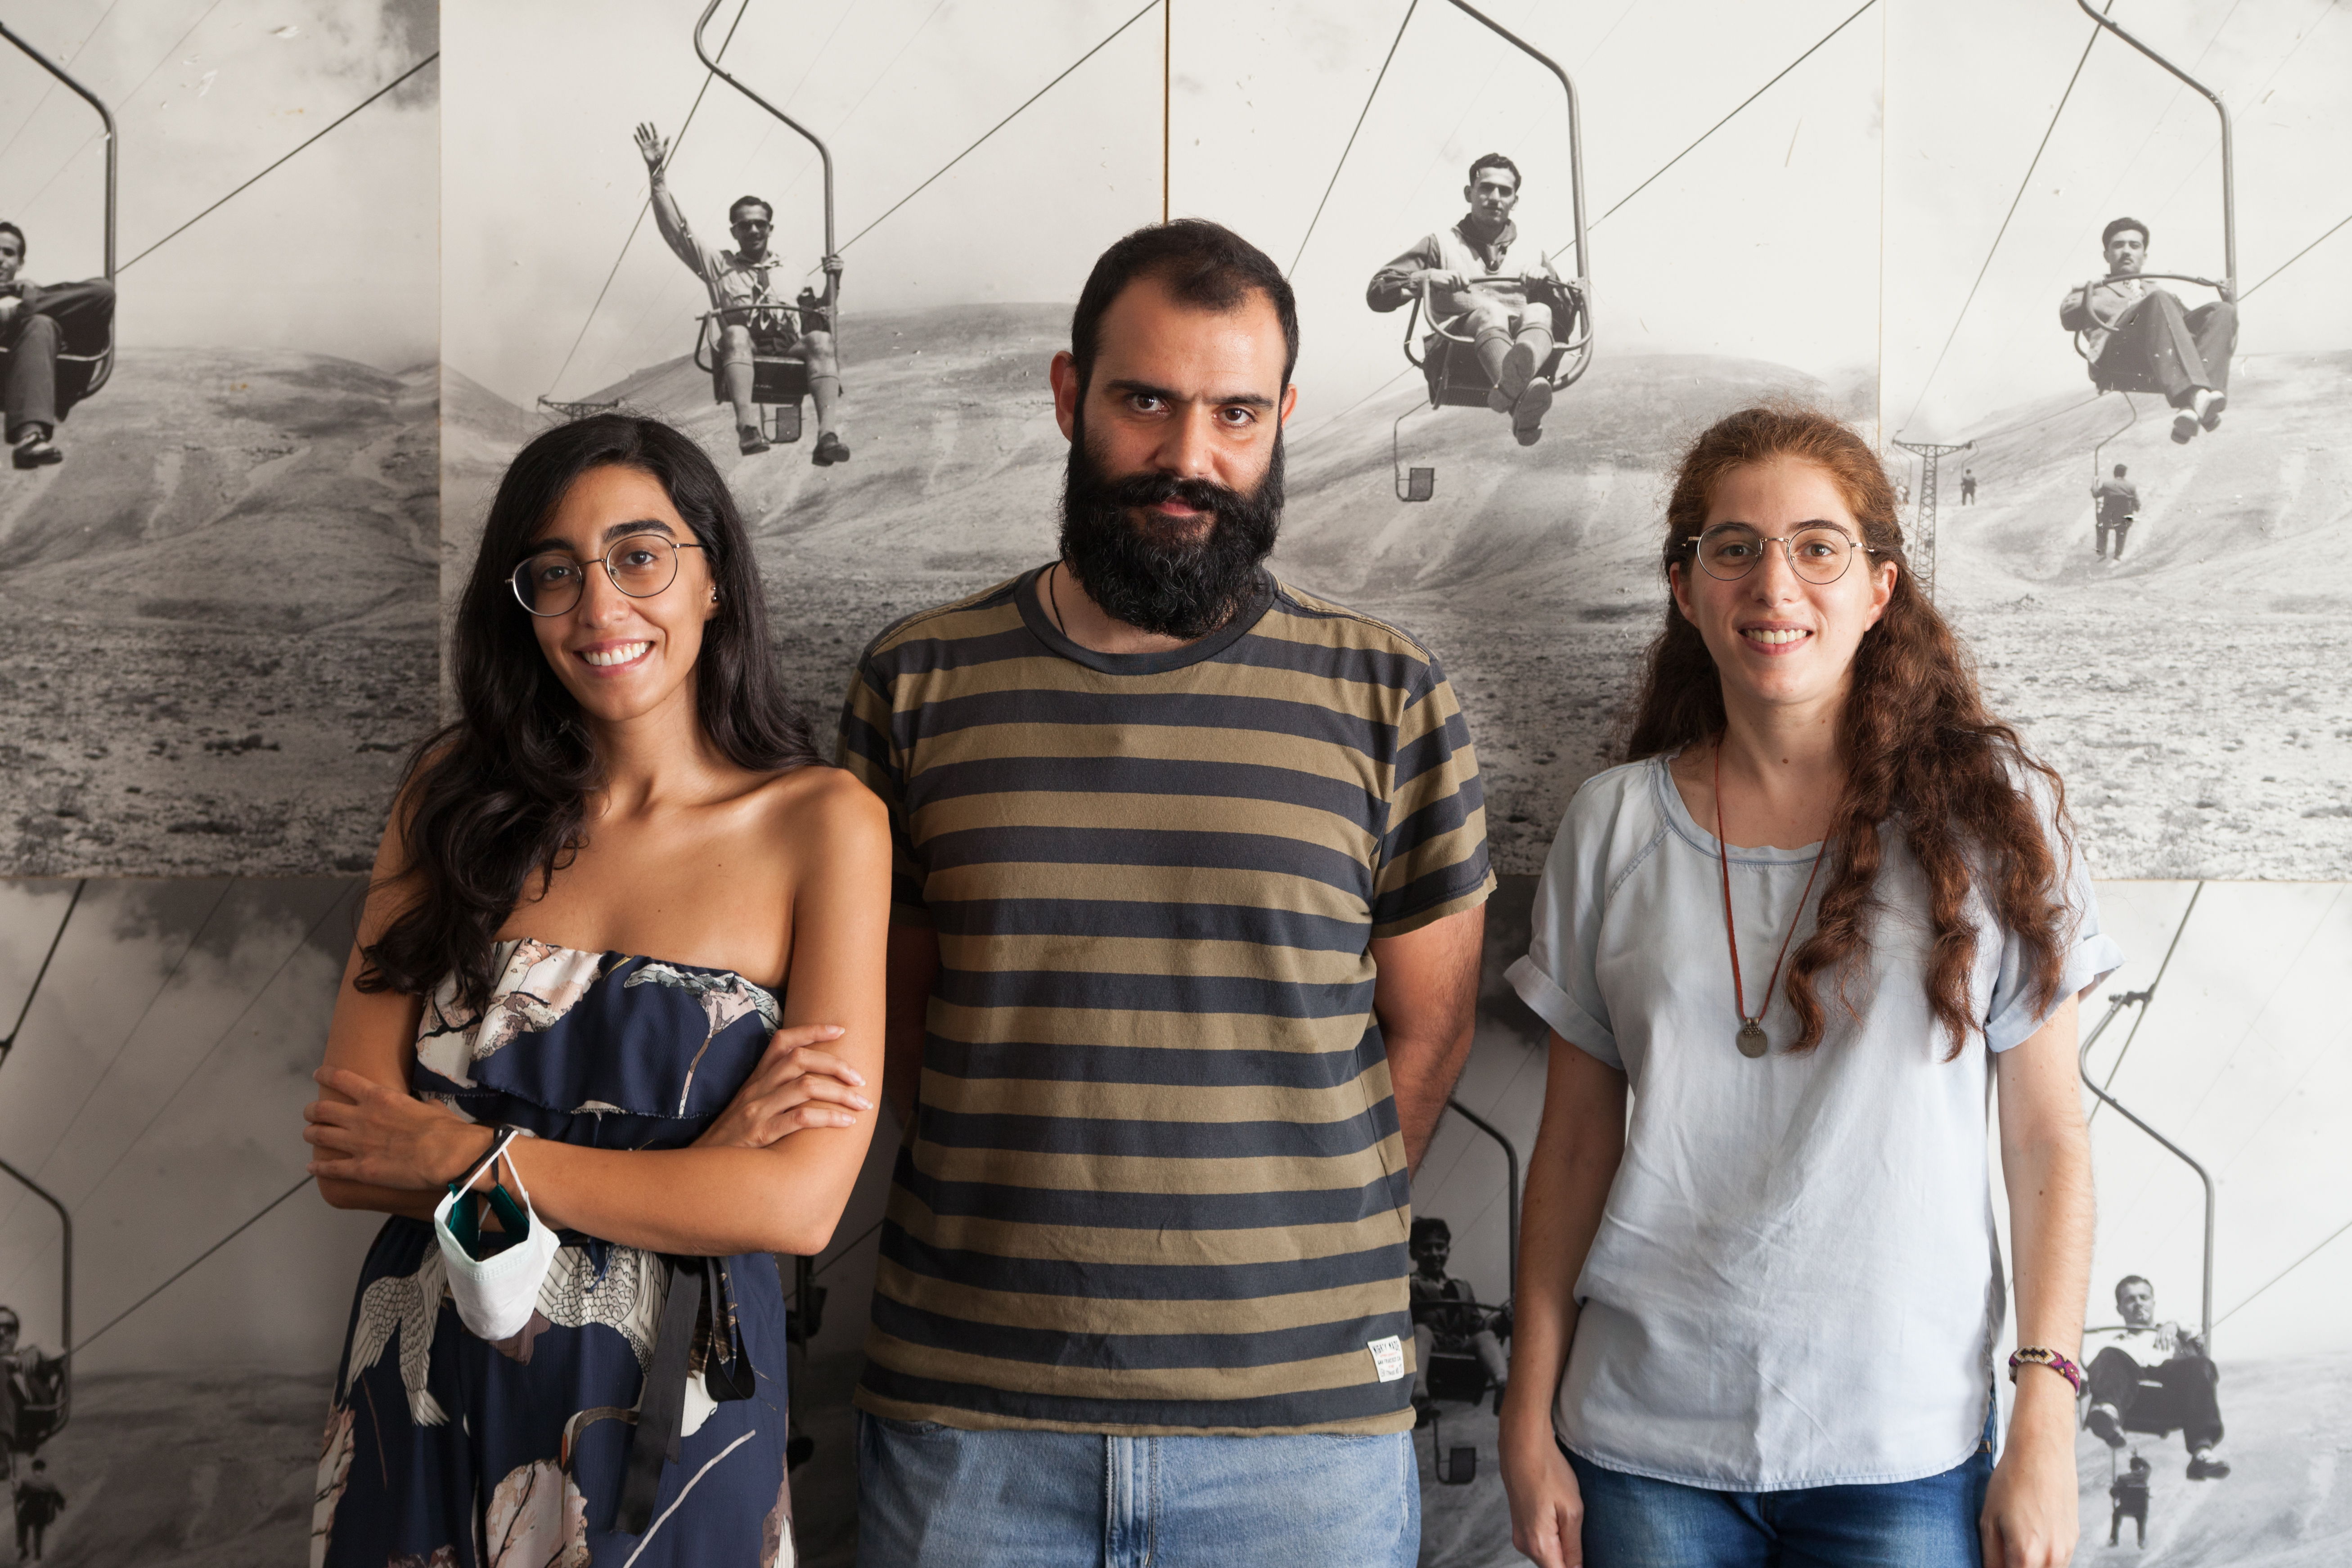 From left to right: Blanche Eid, Asadour Garvanian, and Rhéa Dagher. Photo: Christopher Baaklini.